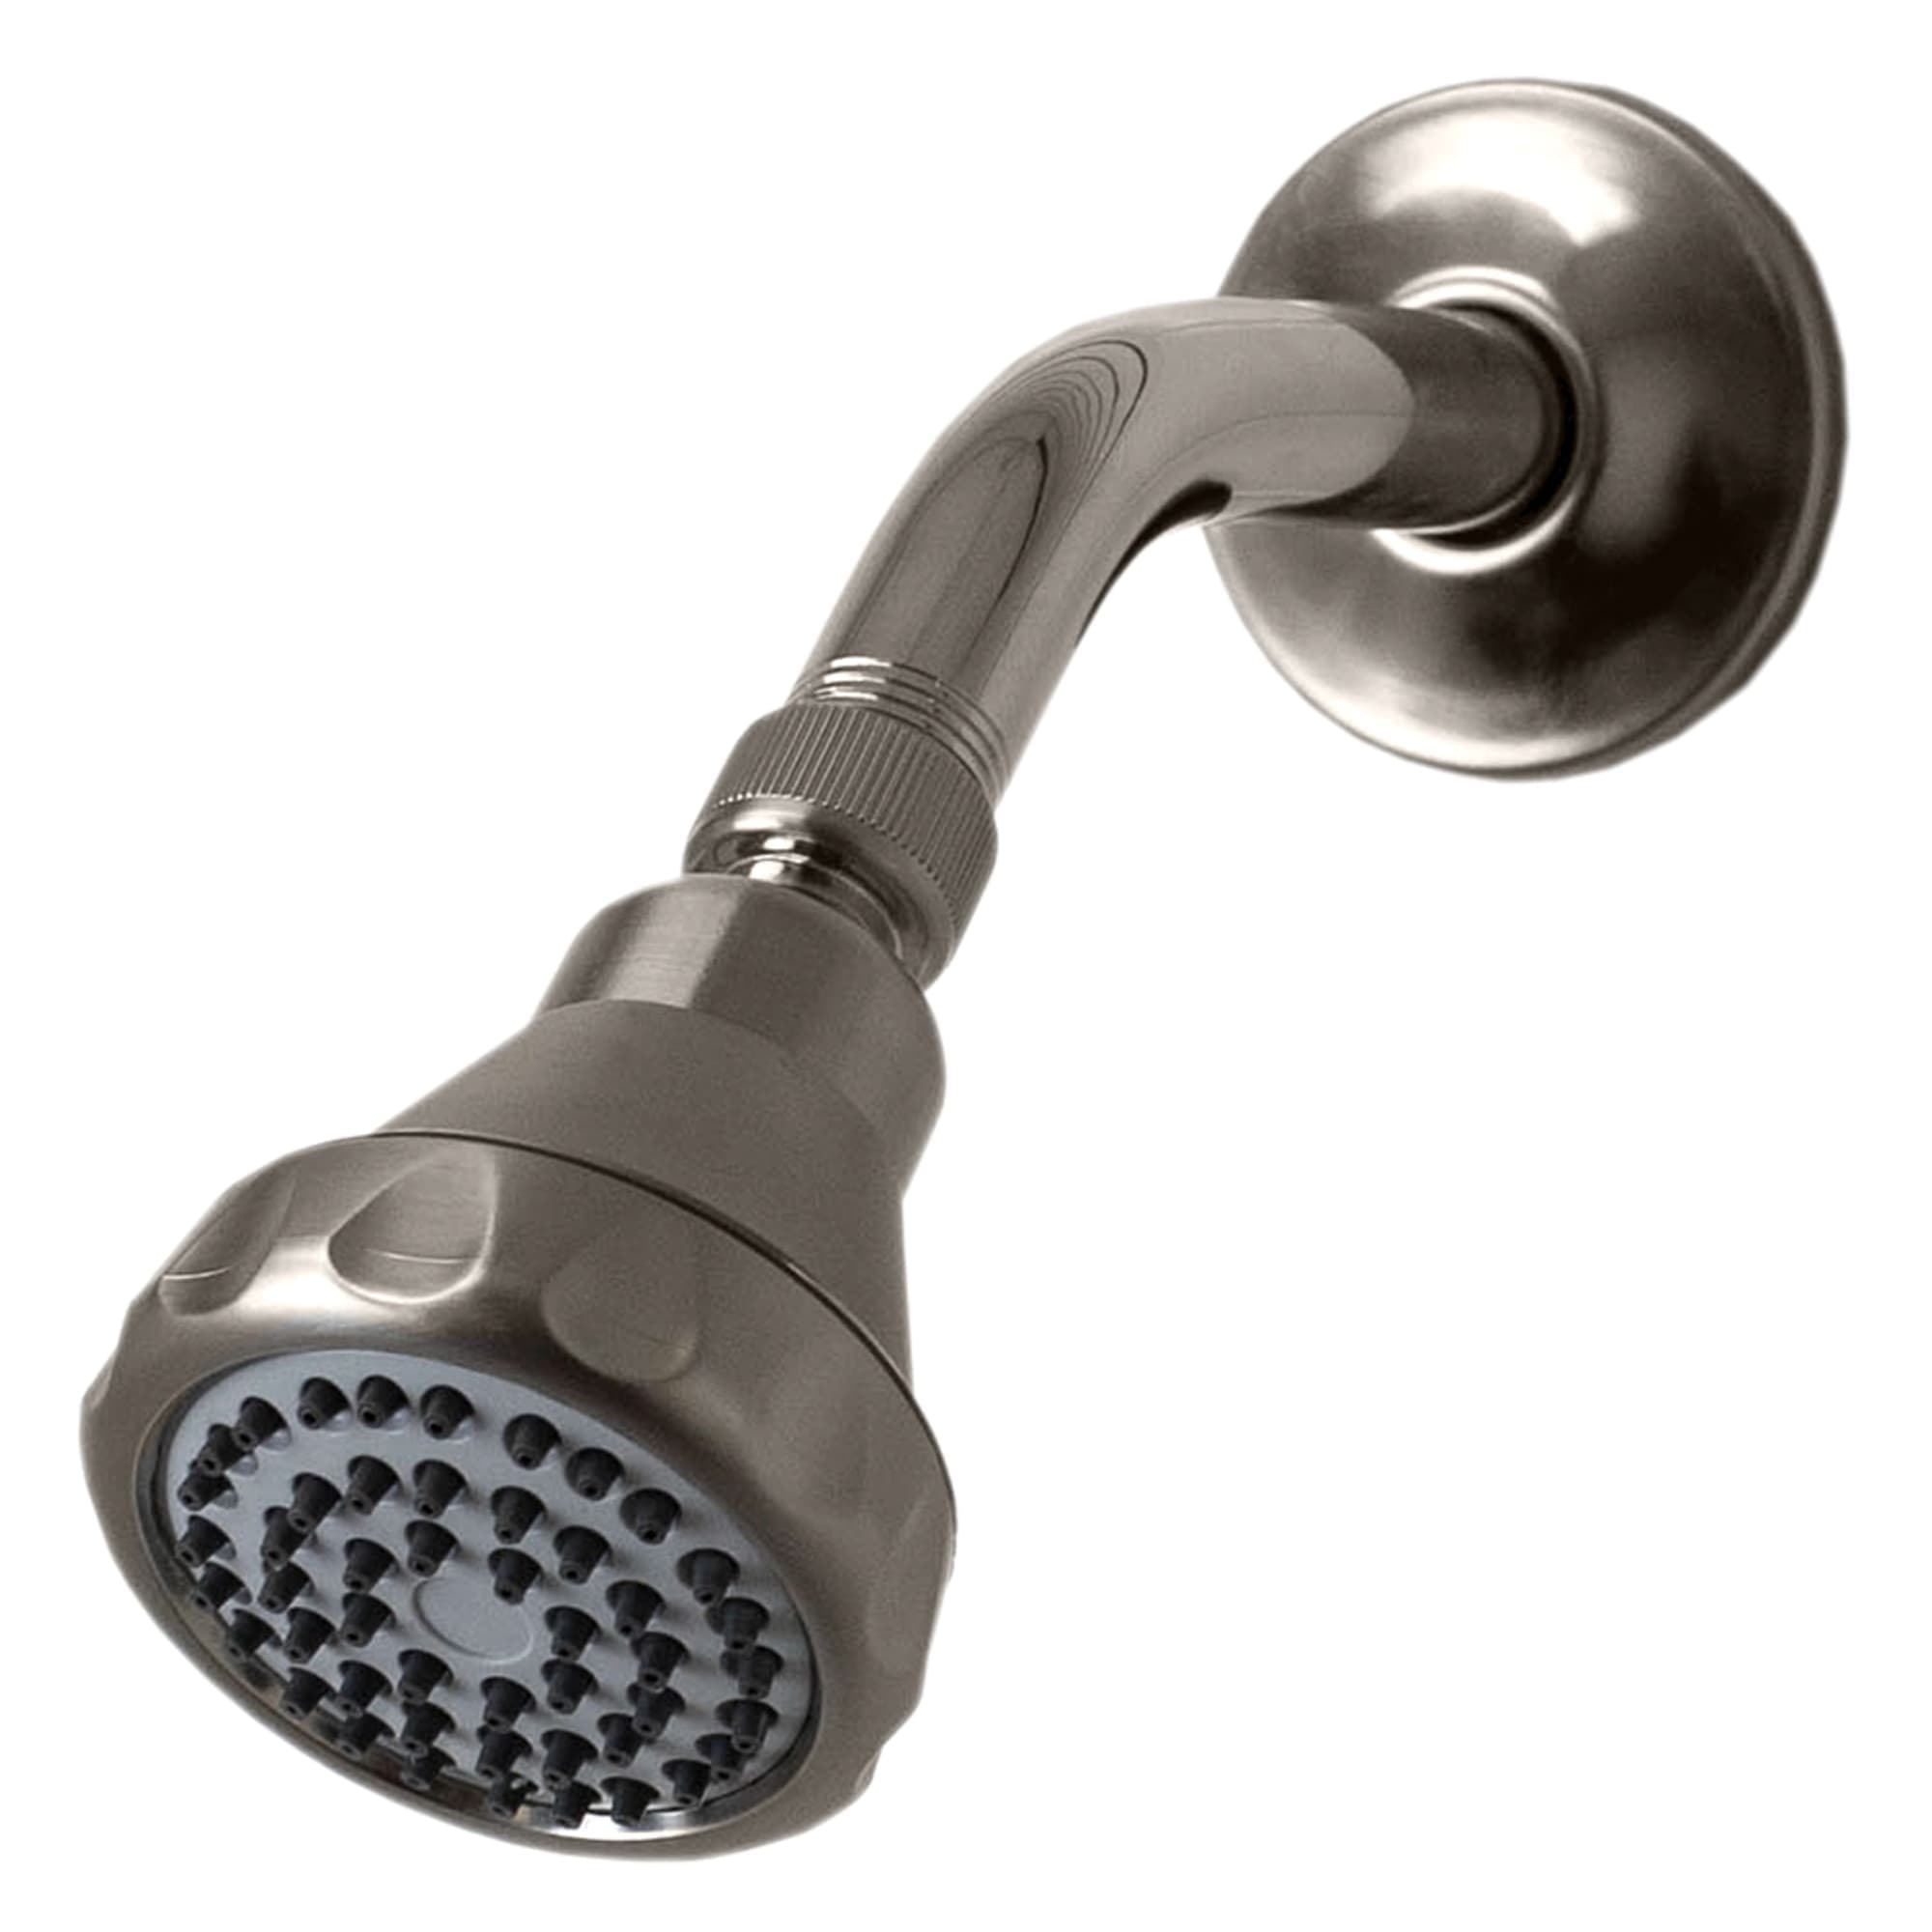 Home Basics Multi-Function Fixed Shower Head, Brushed Satin Nickel $5.00 EACH, CASE PACK OF 12